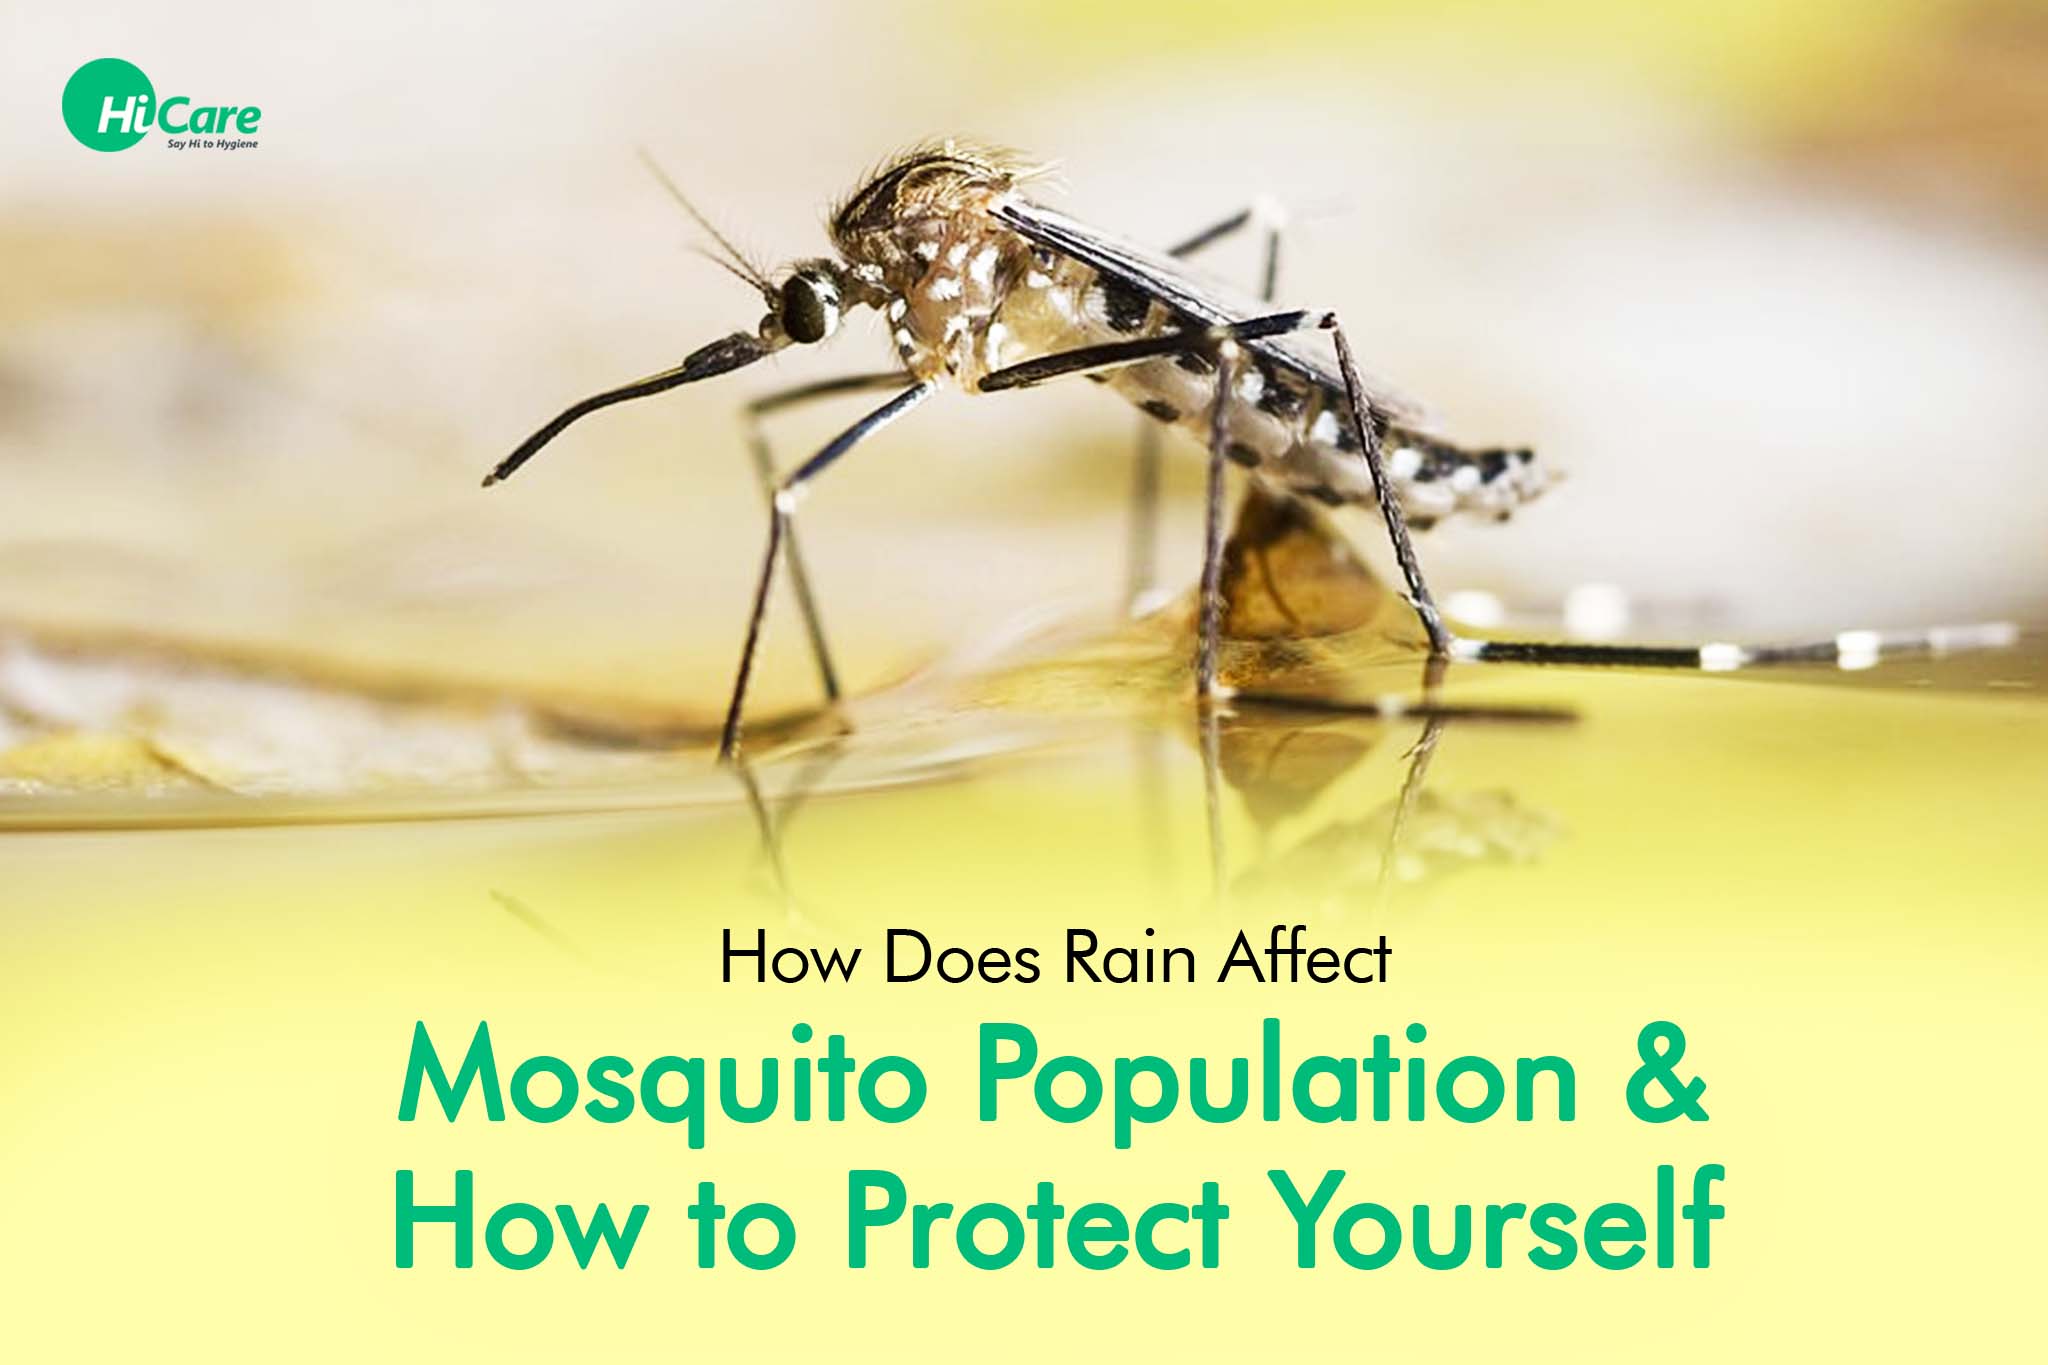 How Does Rain Affect Mosquito Population and How to Protect Yourself?